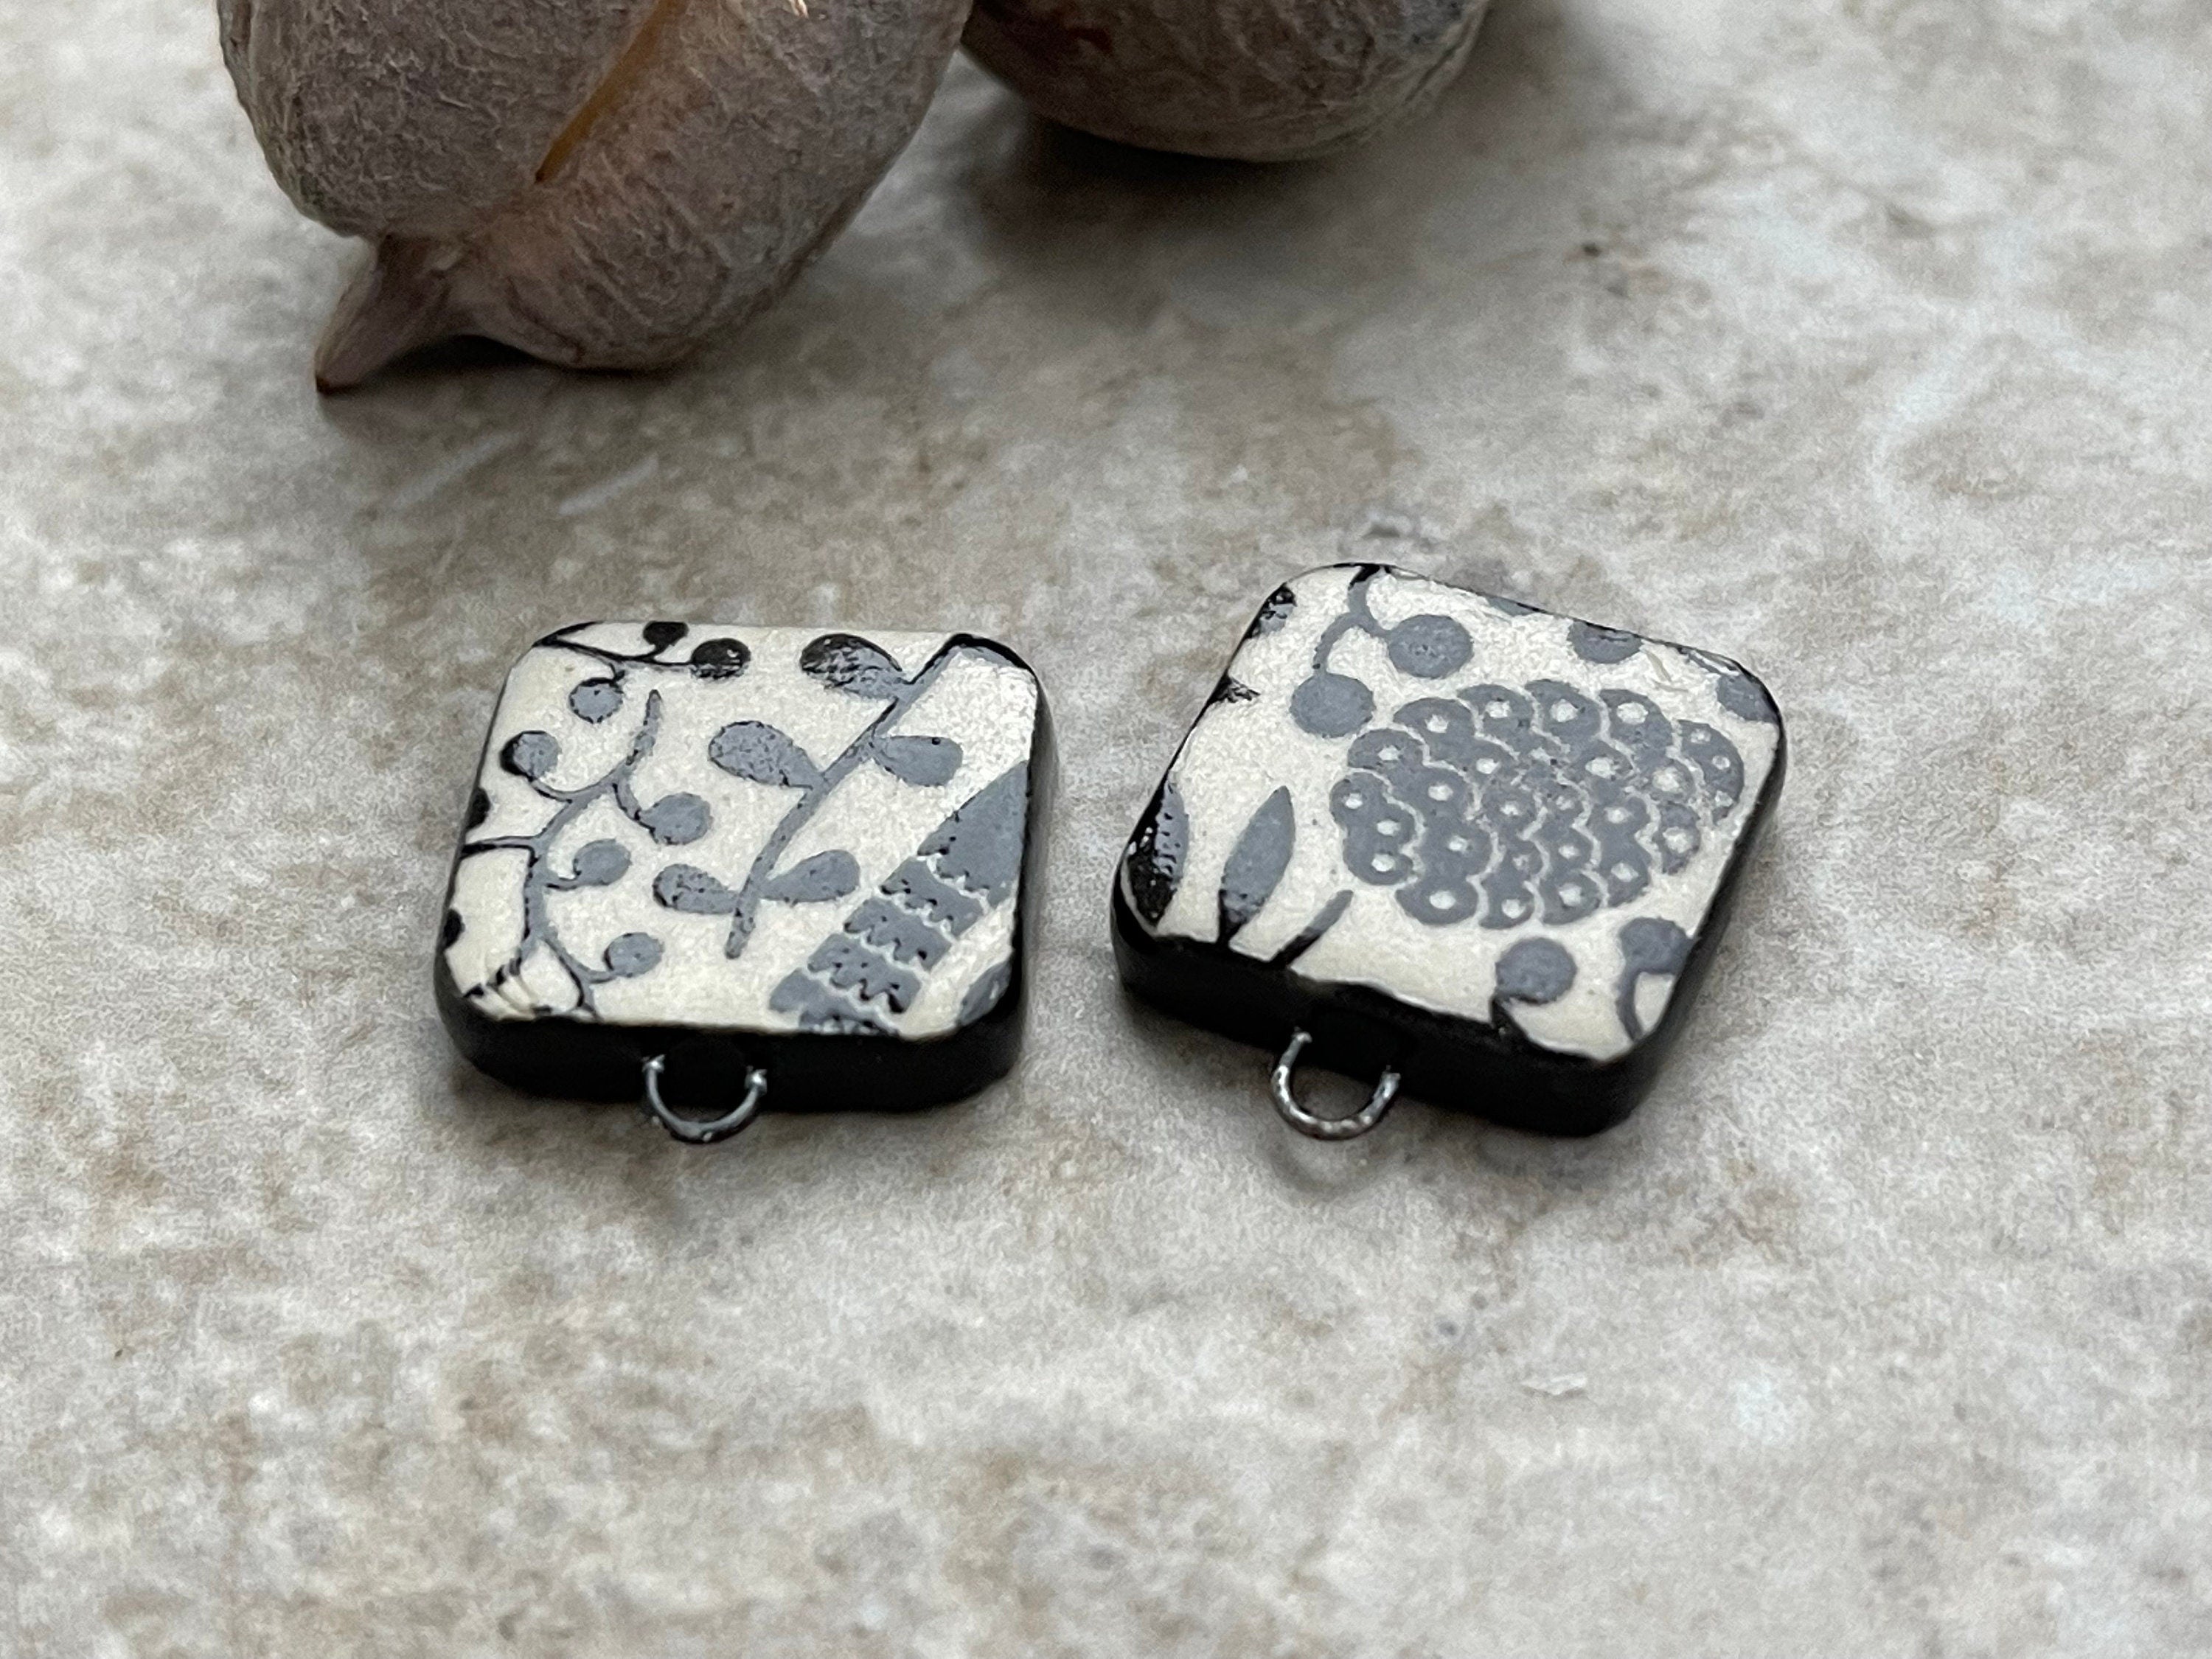 Pinecone Beads, Black and White Square, Black Earring Bead Pair, Unique Bead, Porcelain Ceramic Charms, Jewelry Components, Beading Handmade